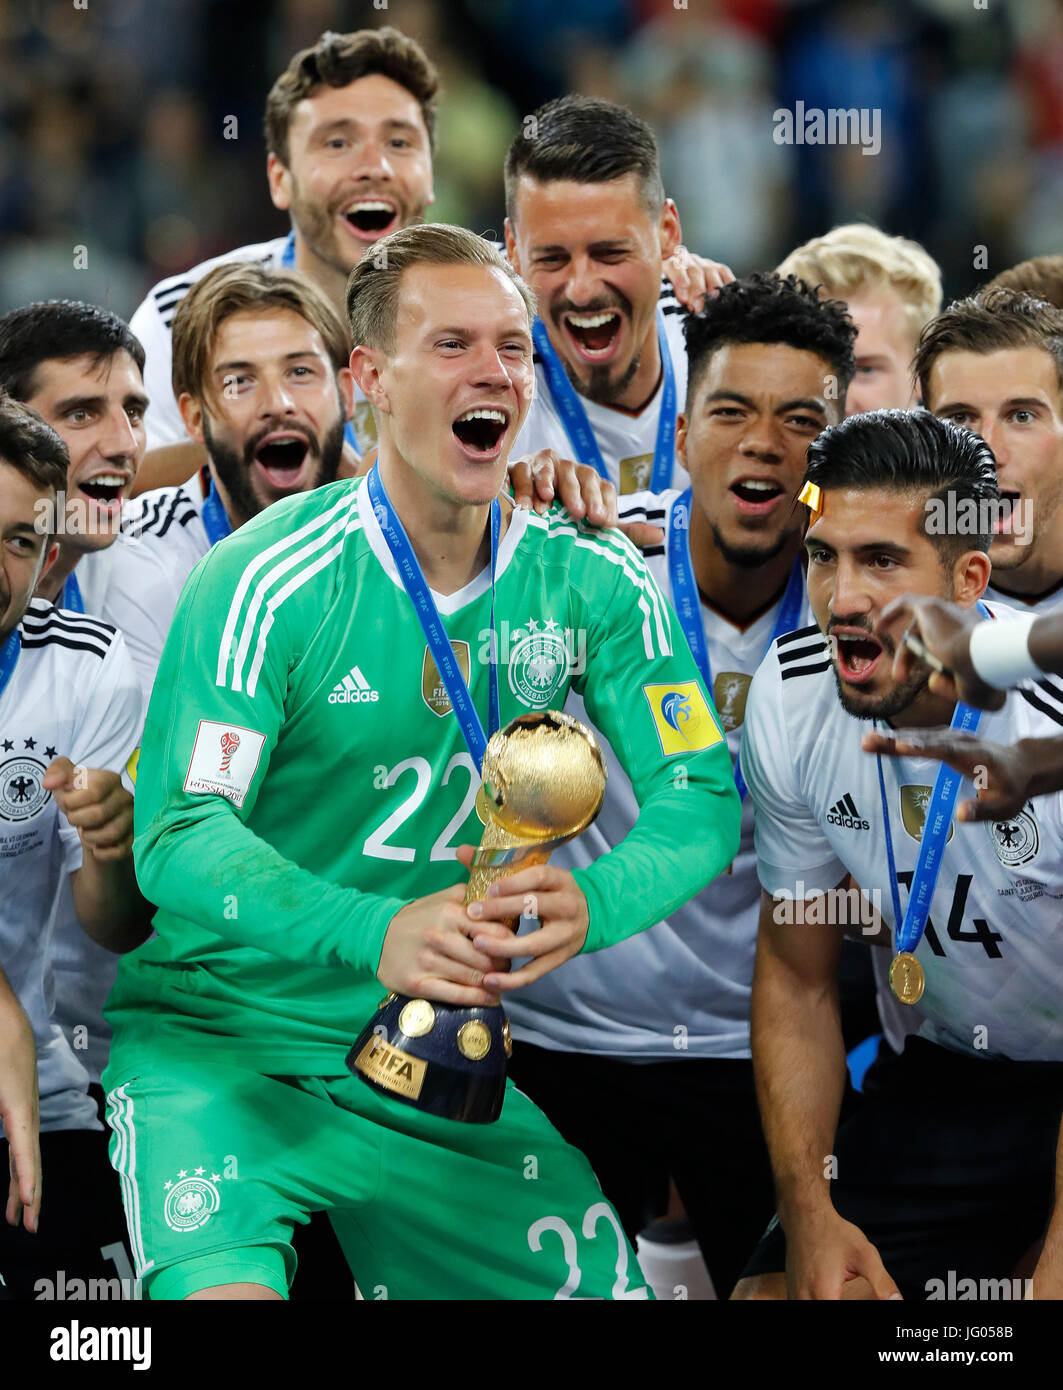 St. Petersburg, Russia. 2nd July, 2017. Marc-Andre TER STEGEN of Germany raises the 2017 Confederations Cup Champion&#39;s Cup r ter starting against Chile on Sunday (02), held at the Krestovsky Stadium (Zenit Arena) in St.ersburg, Rus Russia. (Photo: Rodolfo Buhrer/La Imagem/Fotoarena) Stock Photo